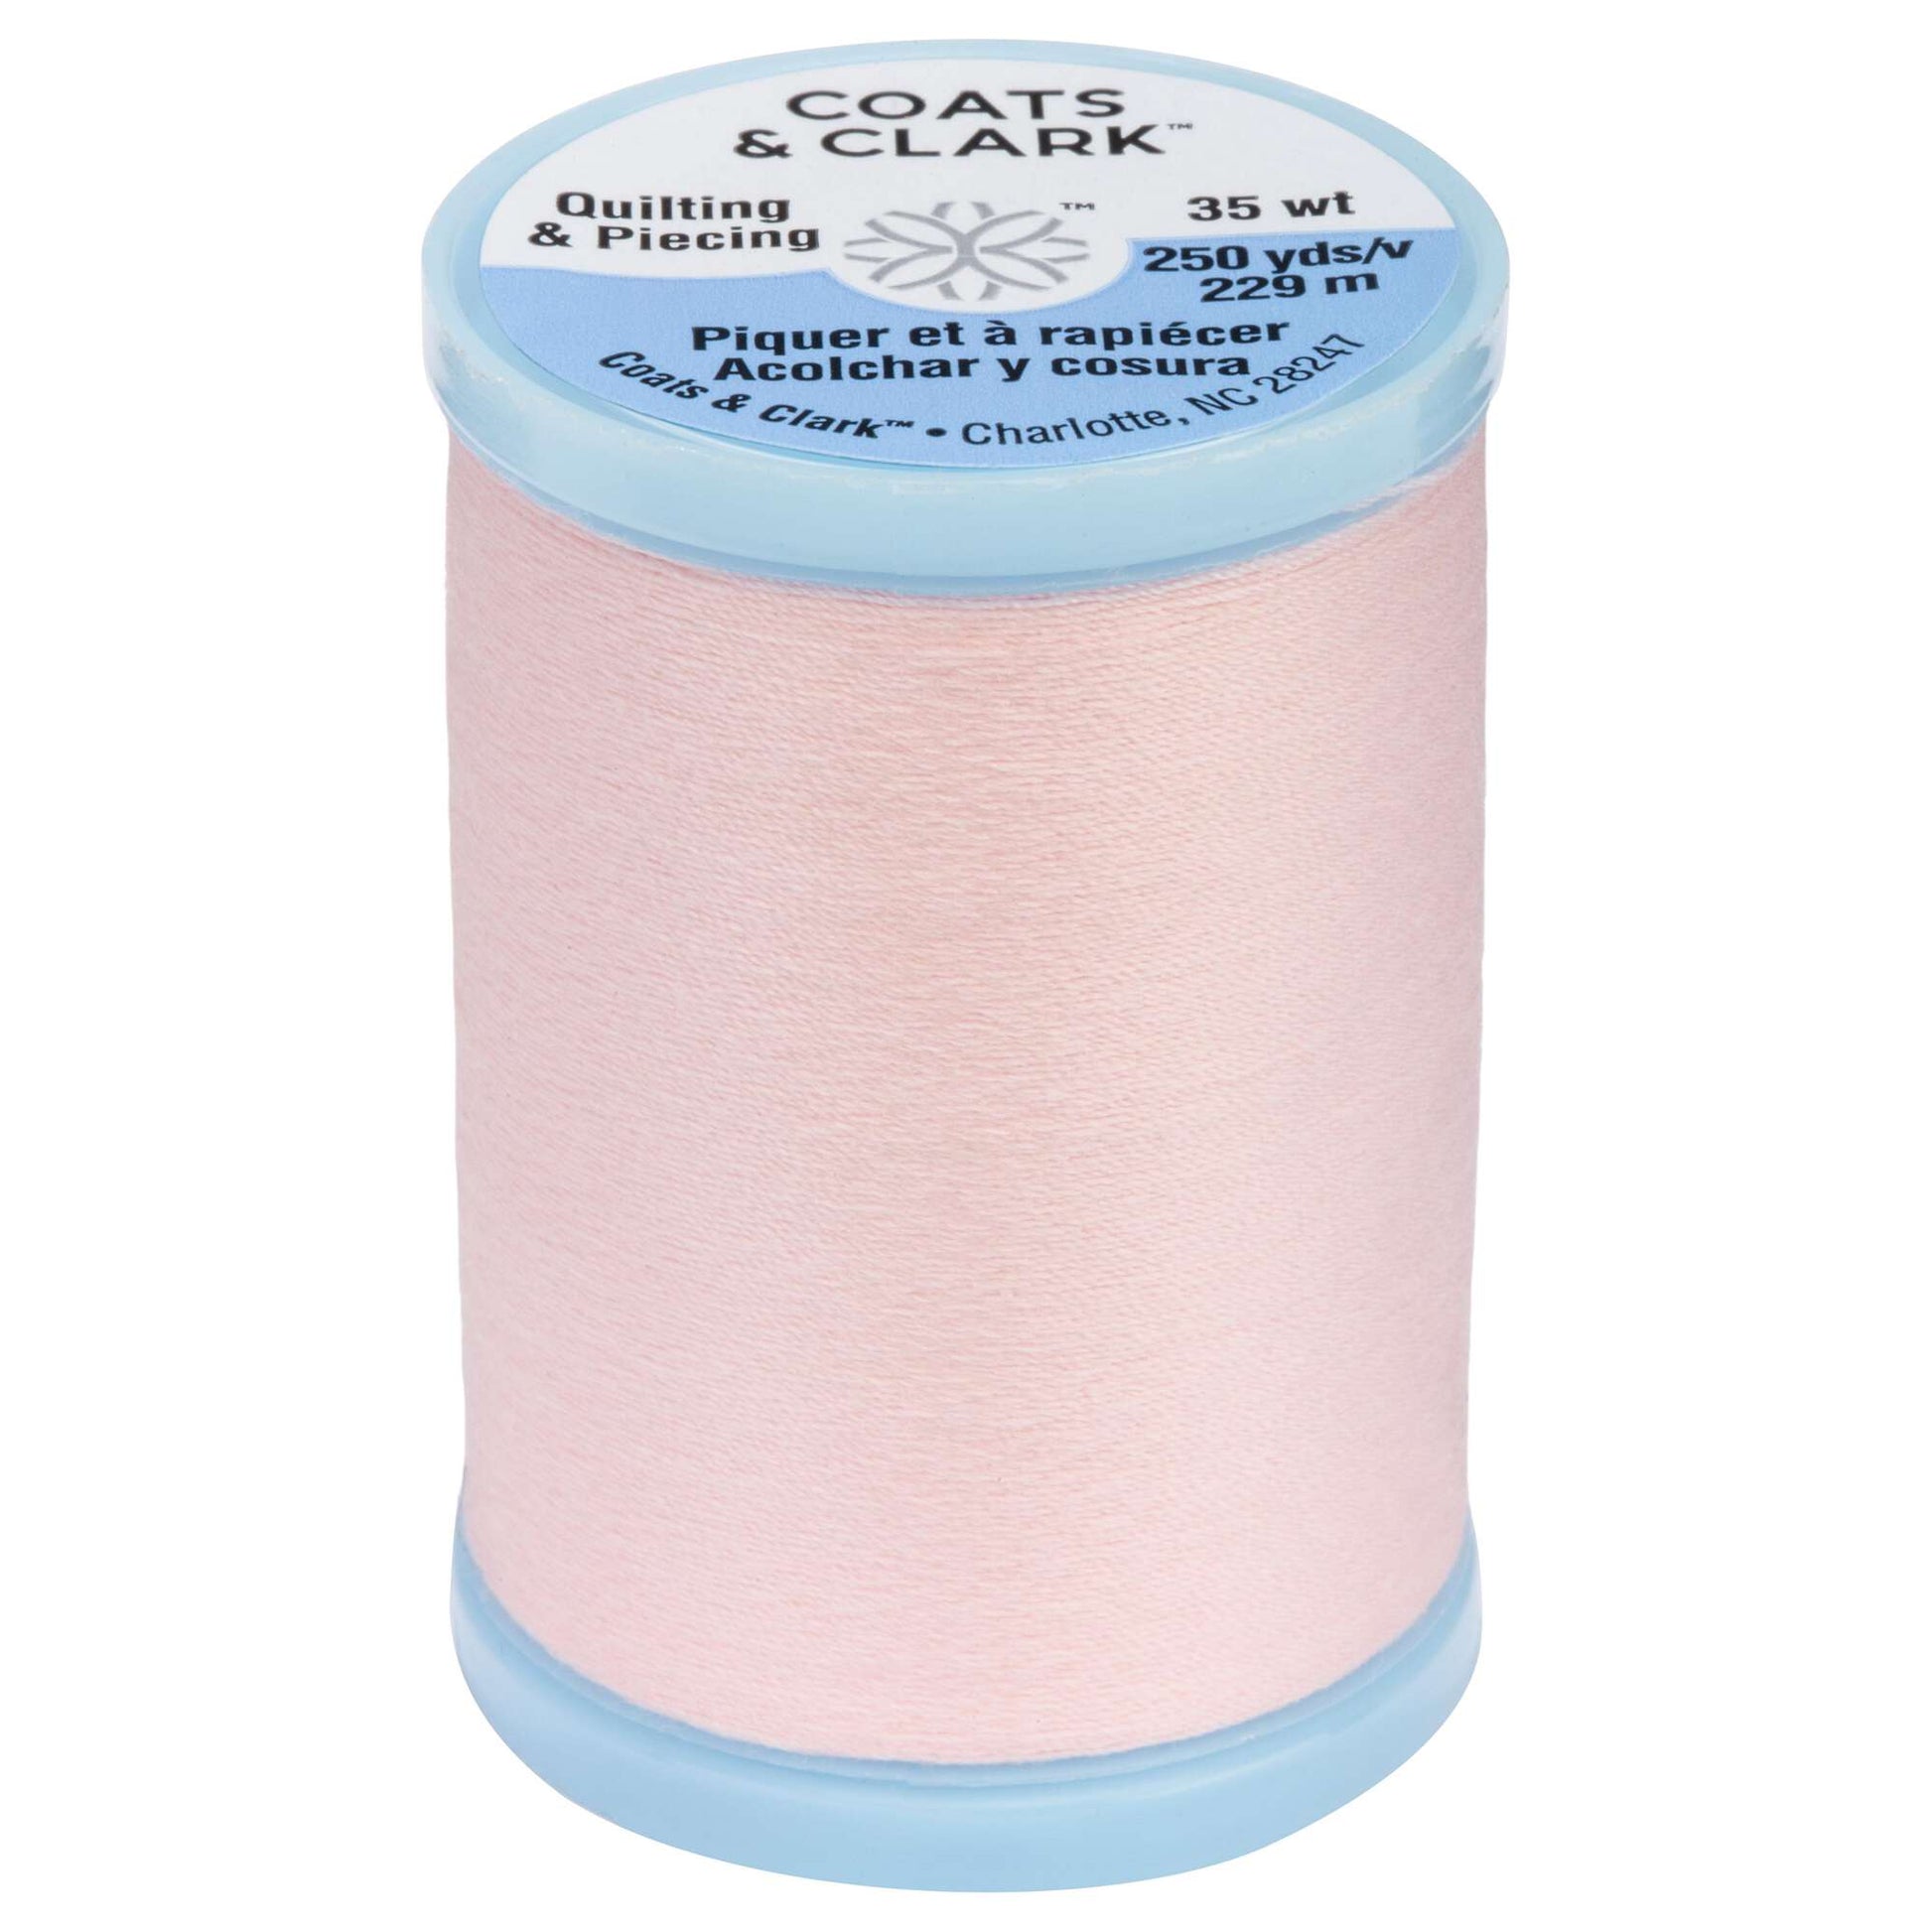 Coats & Clark Cotton Covered Quilting & Piecing Thread (250 Yards) Light Pink